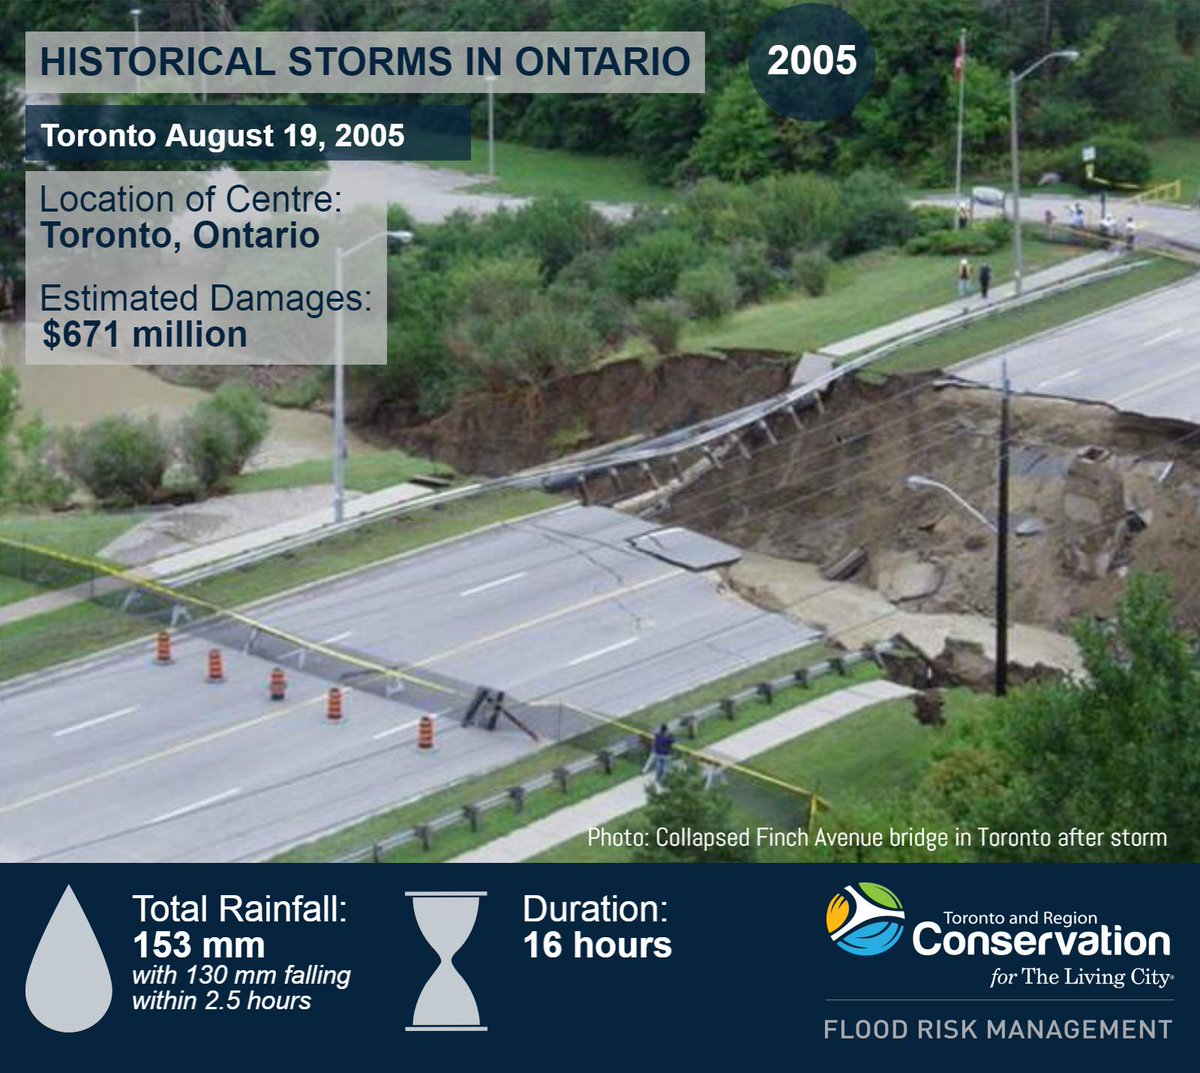 #Torontostorm2005 #Historicalstorms #FloodFacts #WaterSafety #TRCAflood ow.ly/hqMQ30cQipr